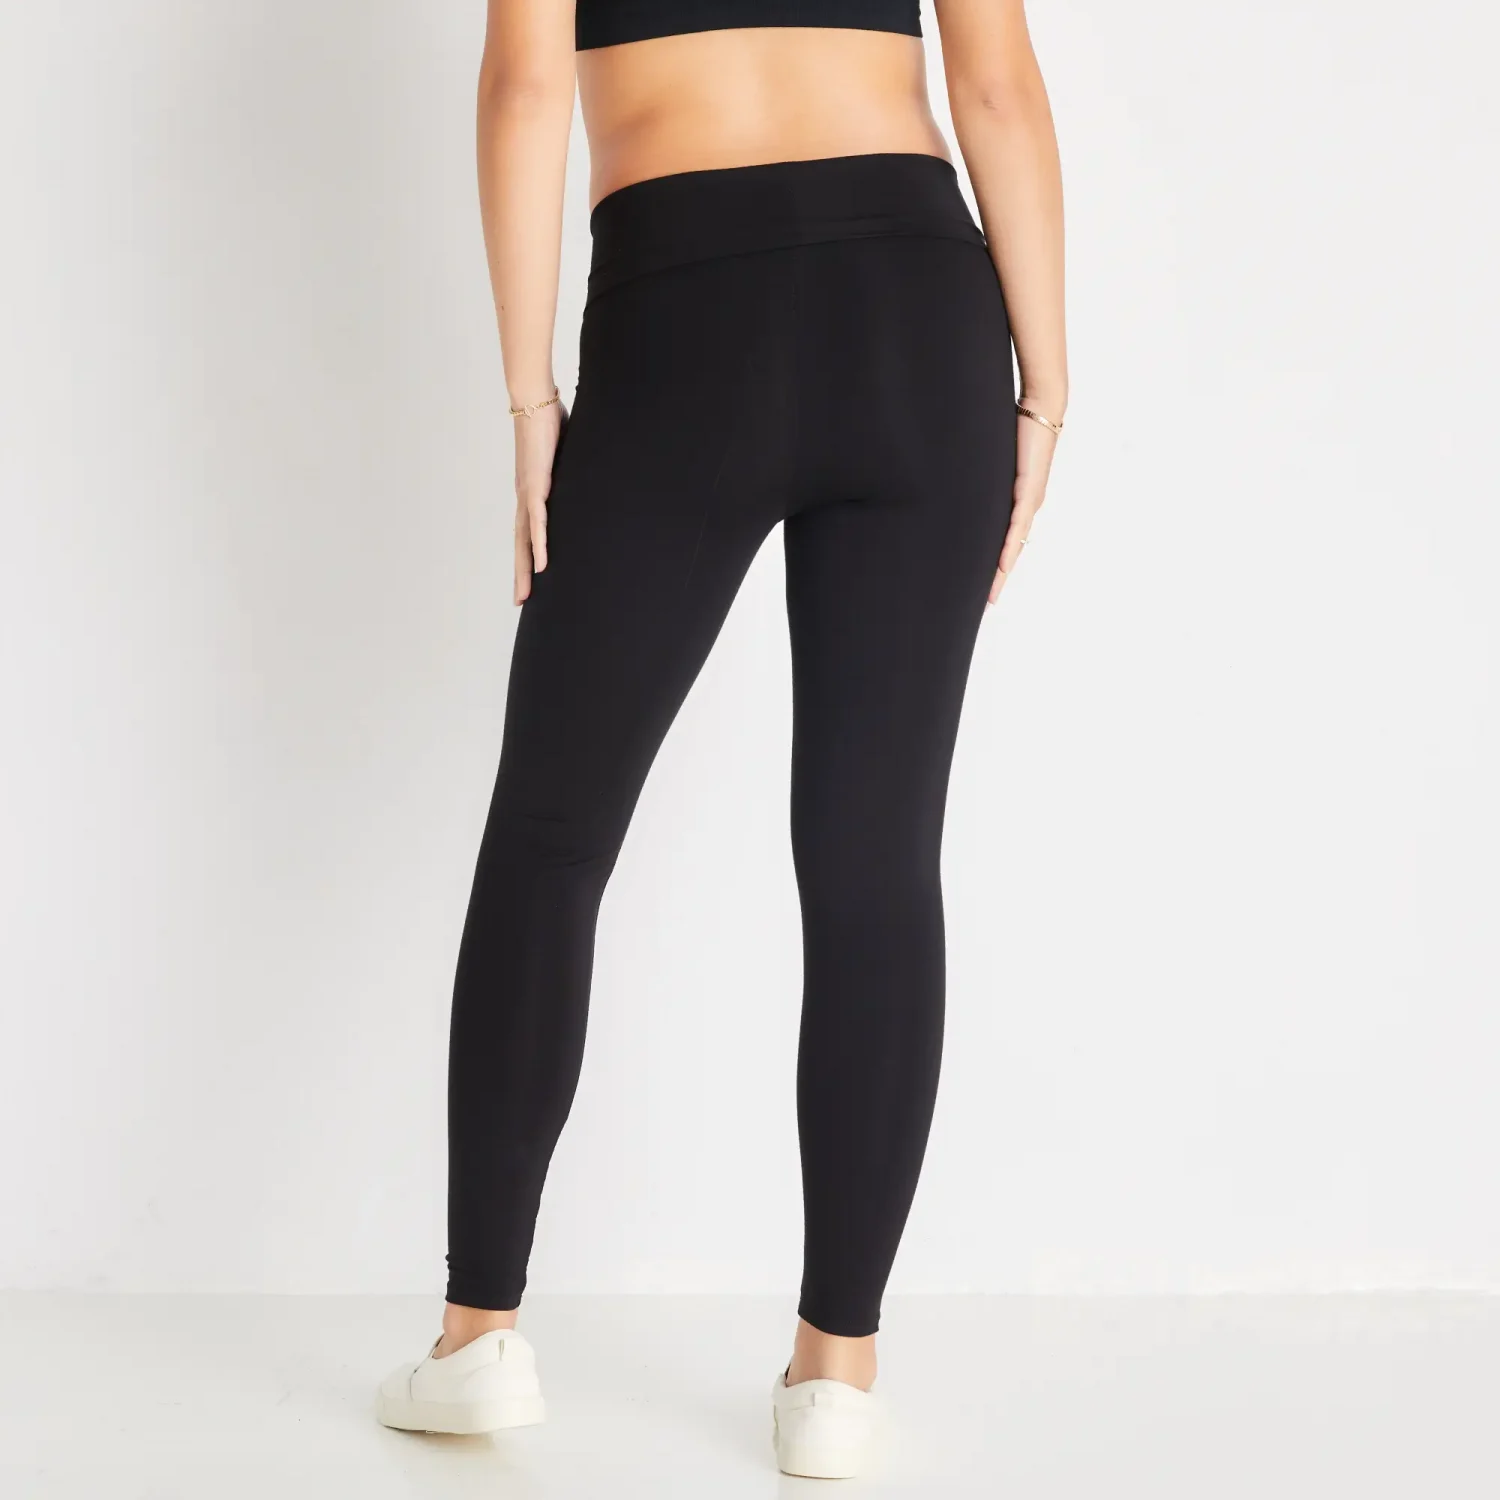 Hatch brand before during and after maternity black leggings